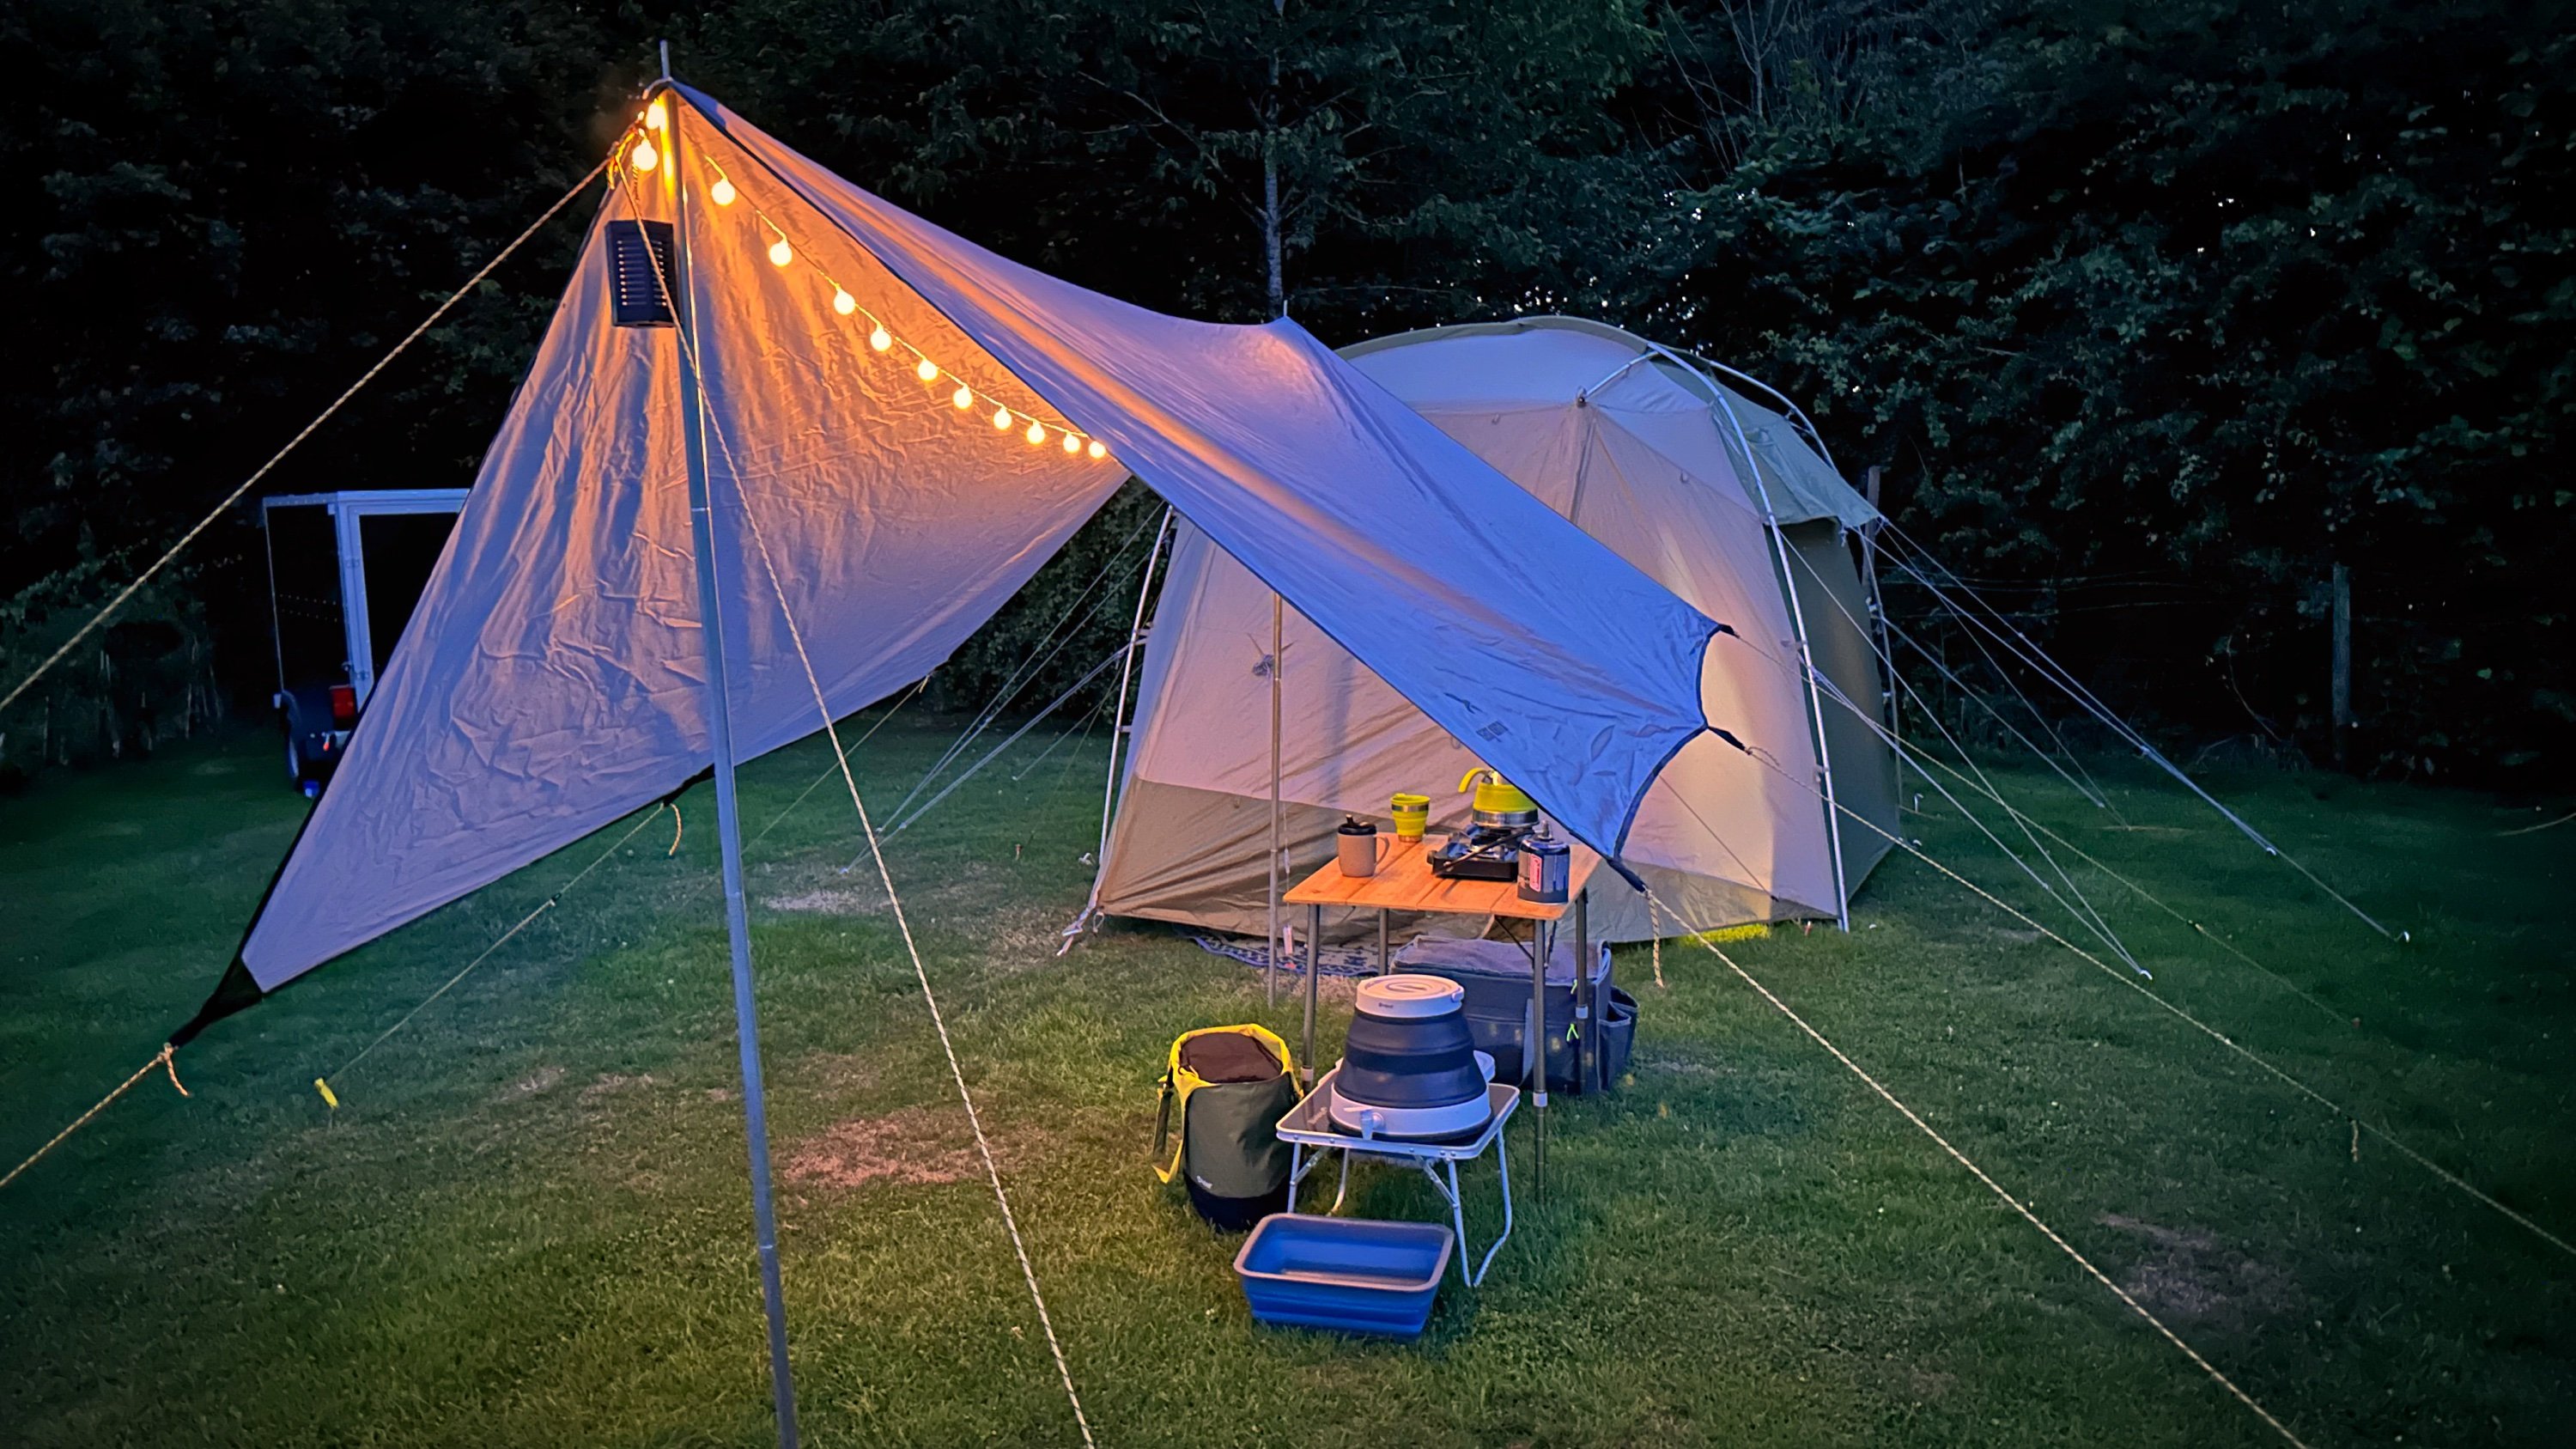 The tent pitched at night with a tarp and lights